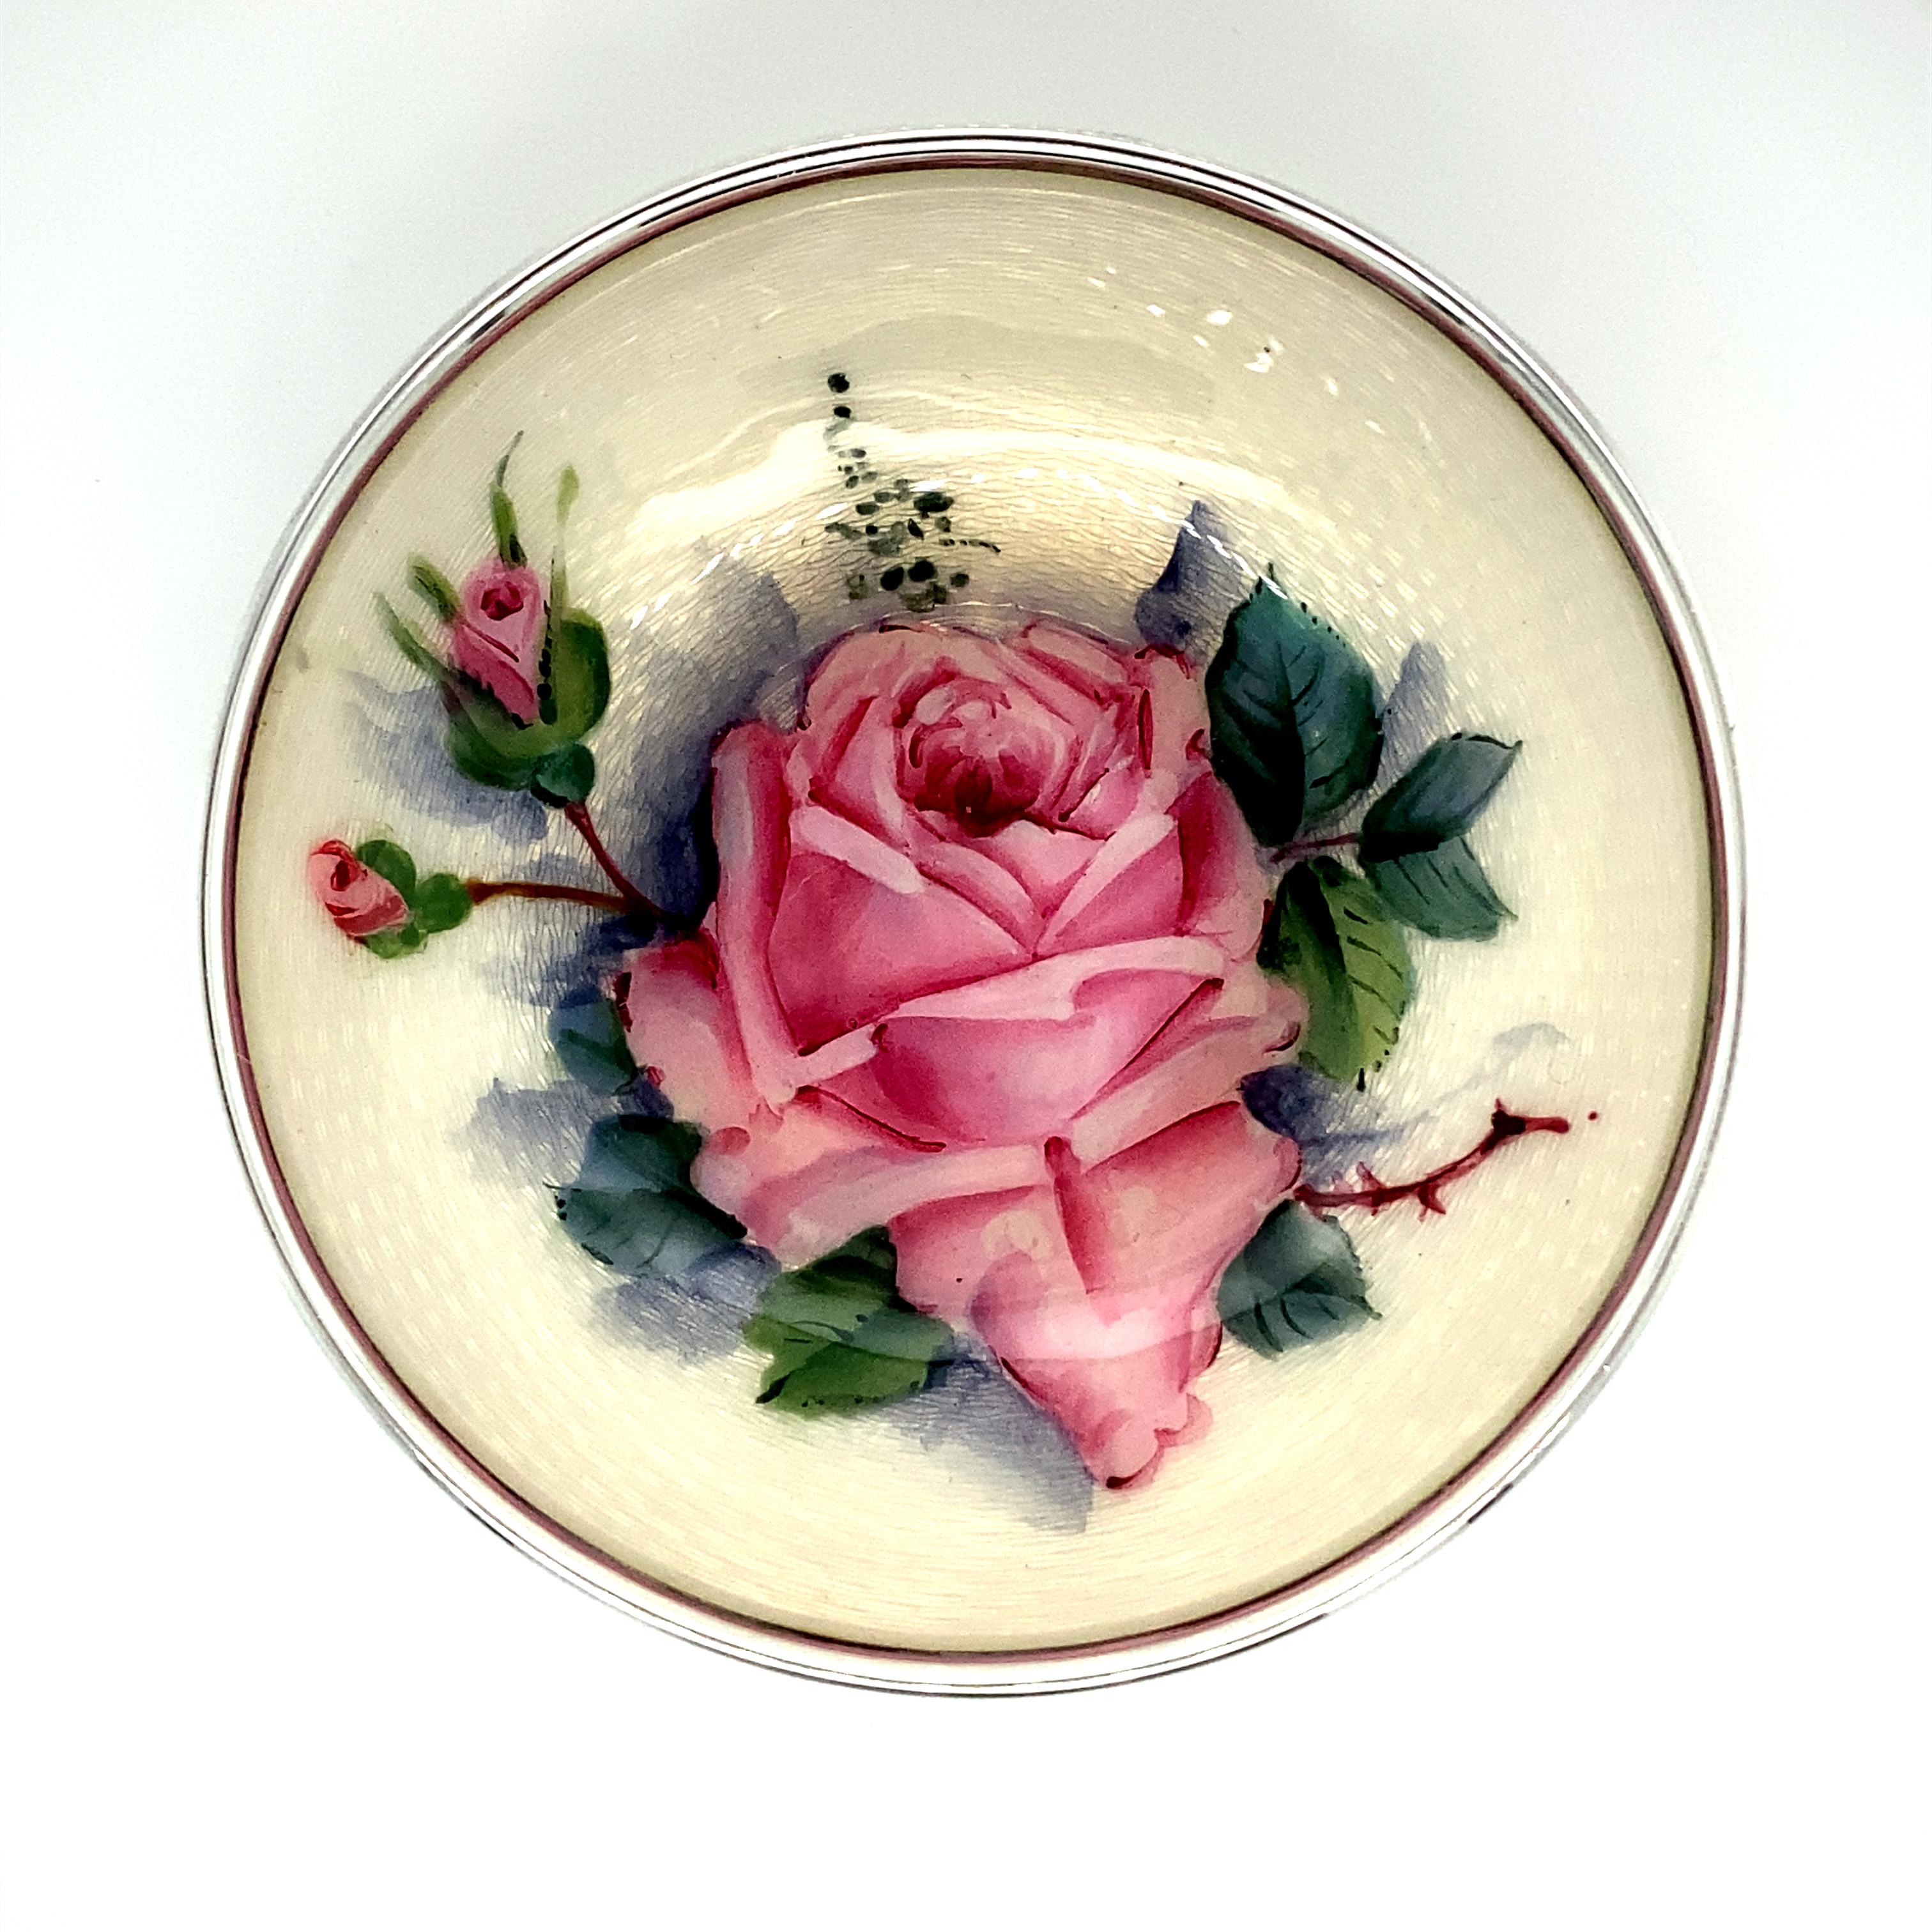 Gorgeous enamel and sterling silver round dish.  A luminous depiction of an enchanting rose with rose buds and leaves in the foreground and an enameled basketweave pattern background.  The colors range from pink, green, gray-blue and cream.  Perfect